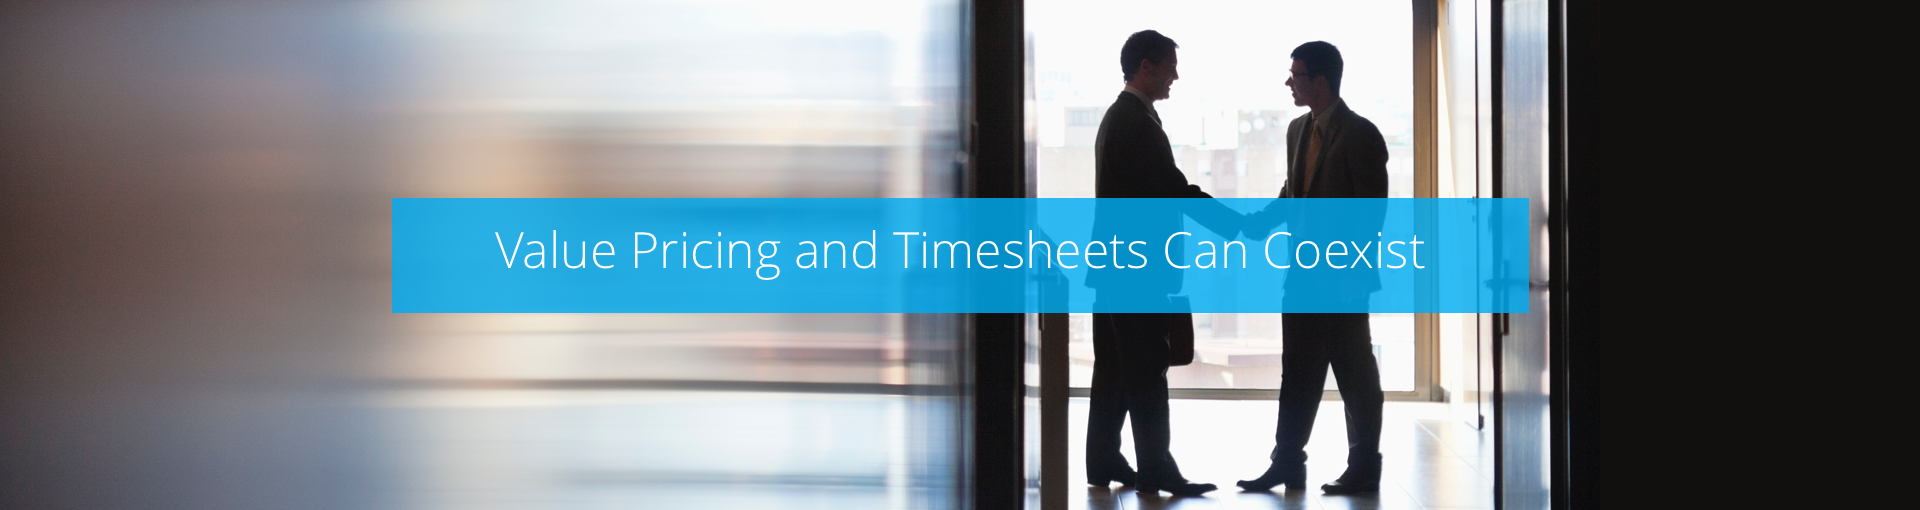 Value Pricing and Timesheets Can Coexist Featured Image